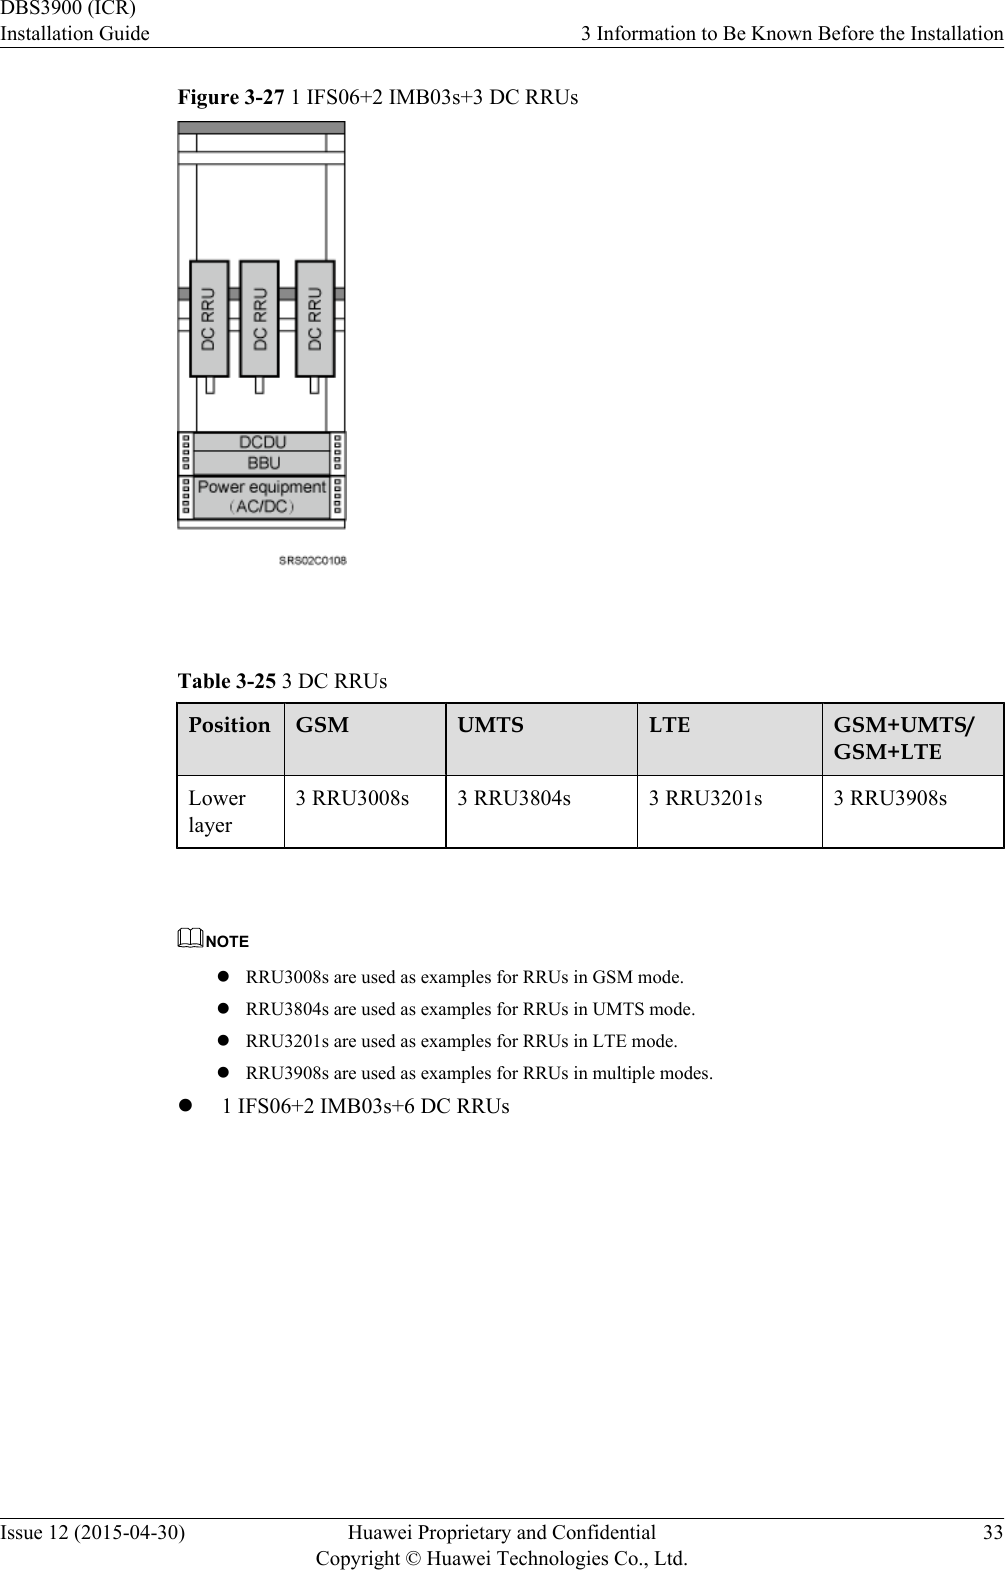 Figure 3-27 1 IFS06+2 IMB03s+3 DC RRUs Table 3-25 3 DC RRUsPosition GSM UMTS LTE GSM+UMTS/GSM+LTELowerlayer3 RRU3008s 3 RRU3804s 3 RRU3201s 3 RRU3908s NOTElRRU3008s are used as examples for RRUs in GSM mode.lRRU3804s are used as examples for RRUs in UMTS mode.lRRU3201s are used as examples for RRUs in LTE mode.lRRU3908s are used as examples for RRUs in multiple modes.l1 IFS06+2 IMB03s+6 DC RRUsDBS3900 (ICR)Installation Guide 3 Information to Be Known Before the InstallationIssue 12 (2015-04-30) Huawei Proprietary and ConfidentialCopyright © Huawei Technologies Co., Ltd.33